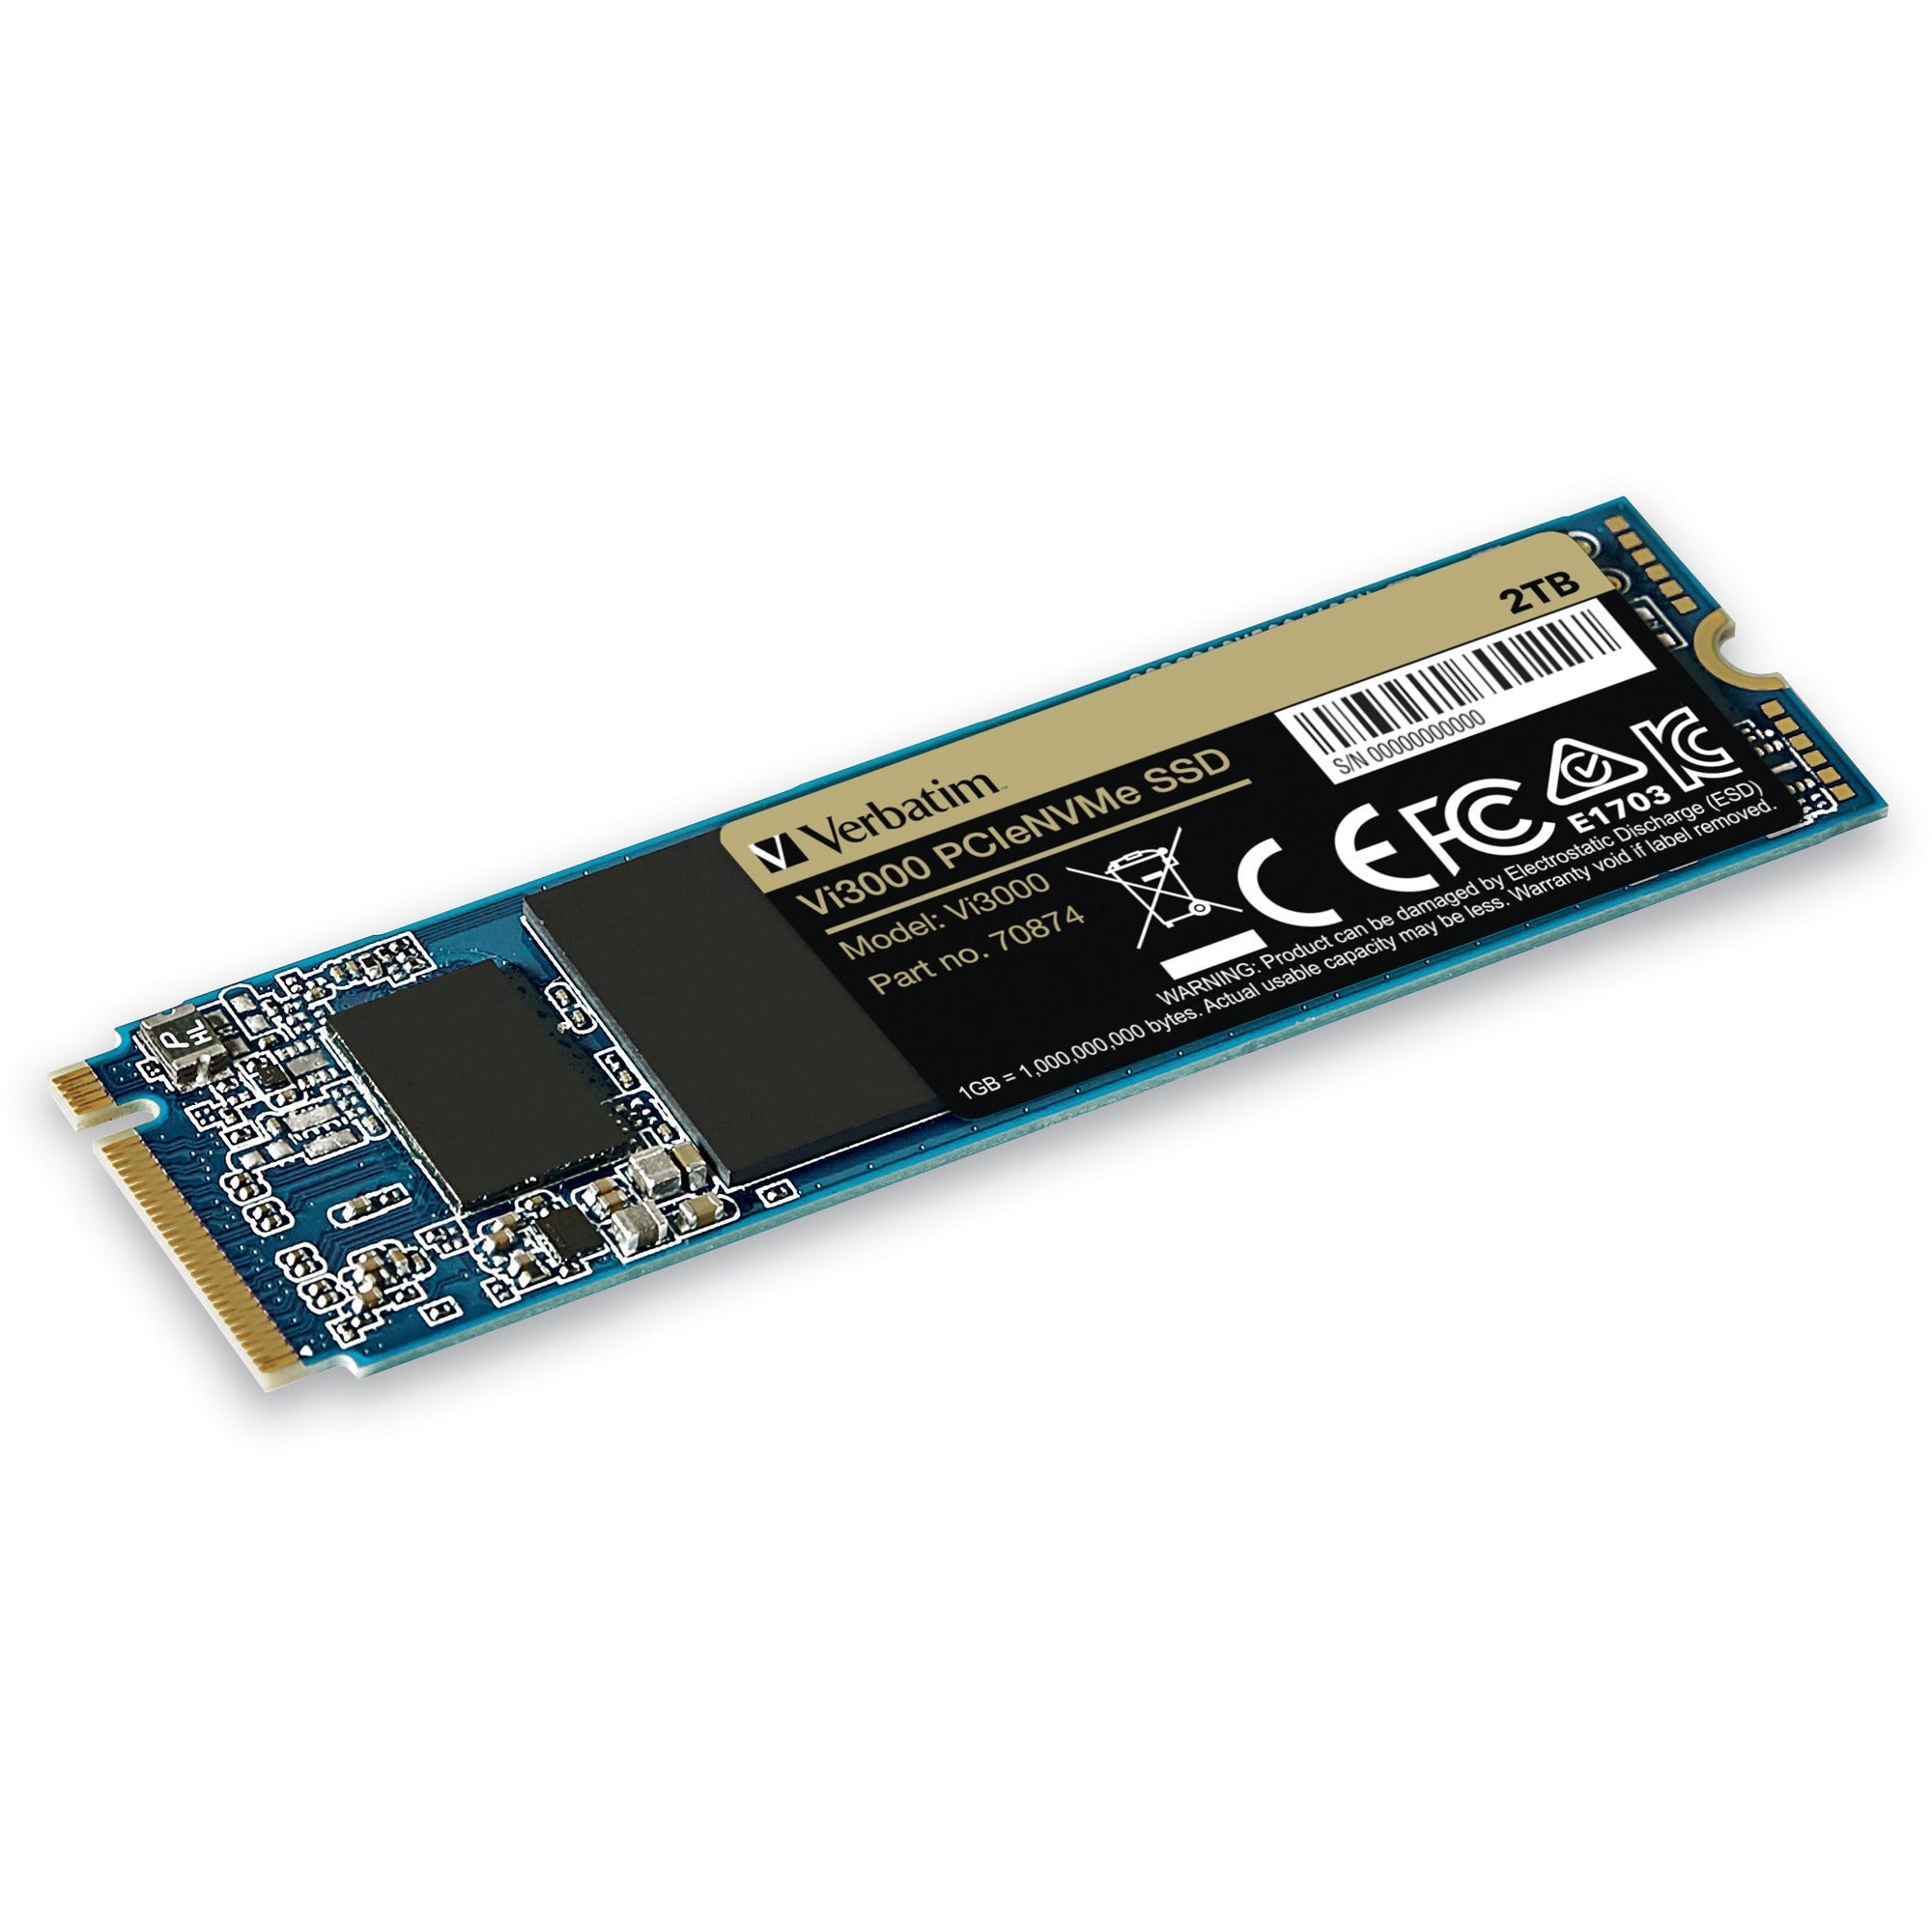 verbatim-vi3000-2-tb-solid-state-drive-m2-2280-internal-pci-express-nvme-pci-express-nvme-30-x4-notebook-desktop-pc-device-supported-1200-tb-tbw-3000-mb-s-maximum-read-transfer-rate-5-year-warranty_ver70874 - 1